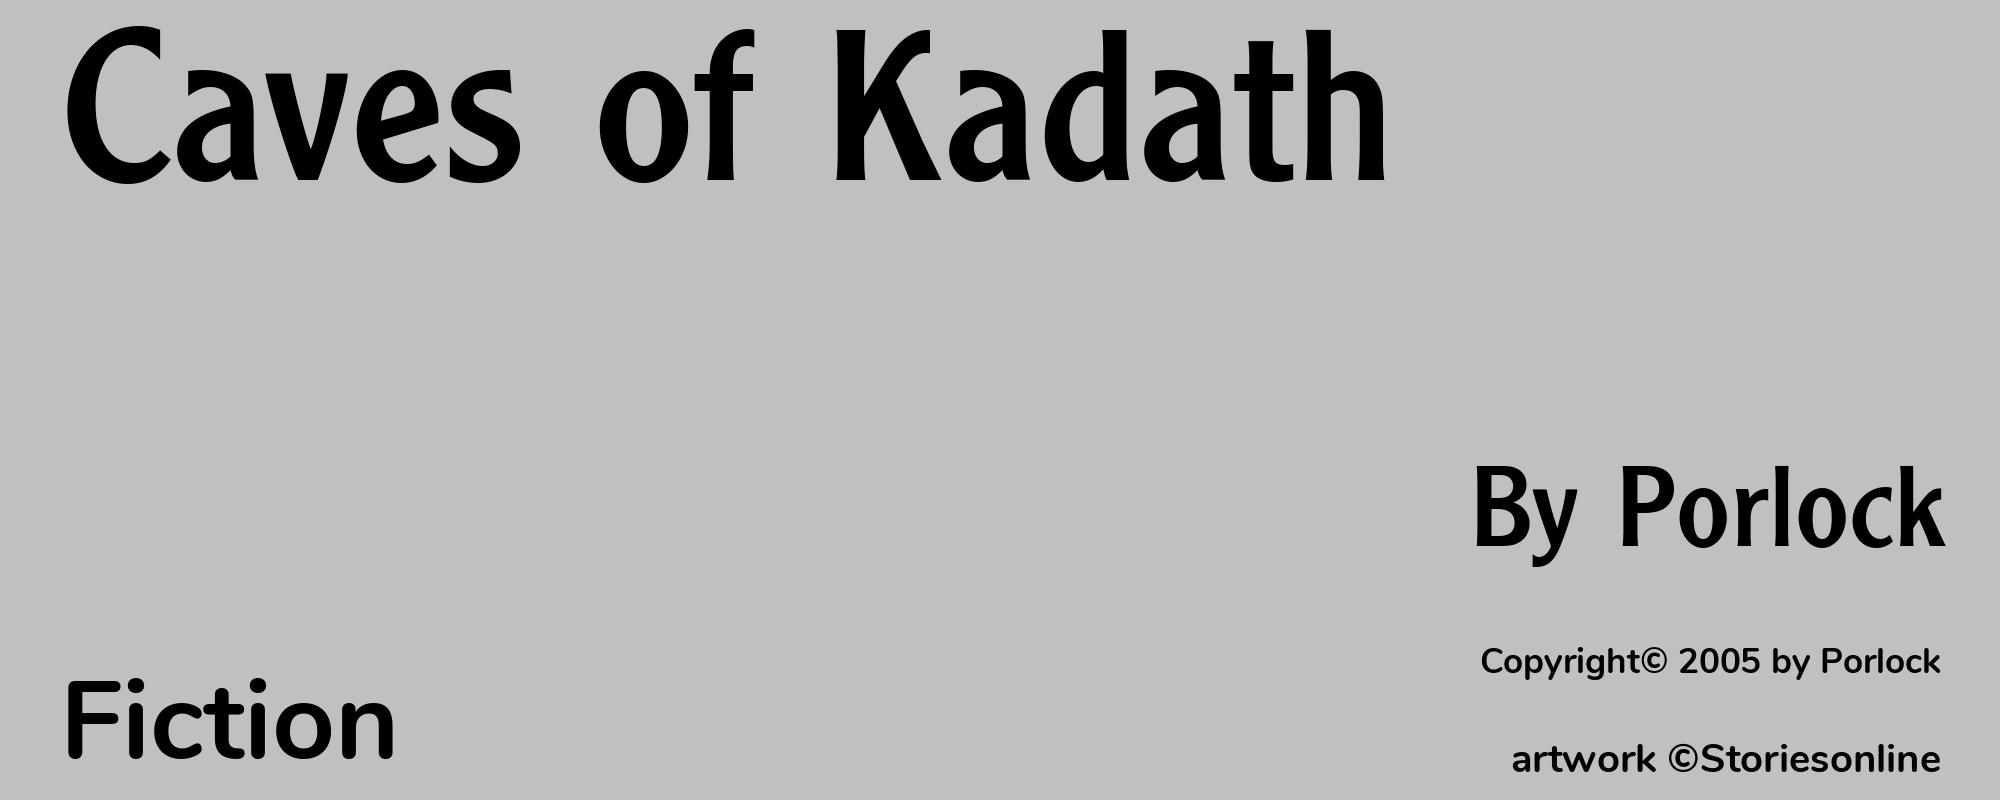 Caves of Kadath - Cover